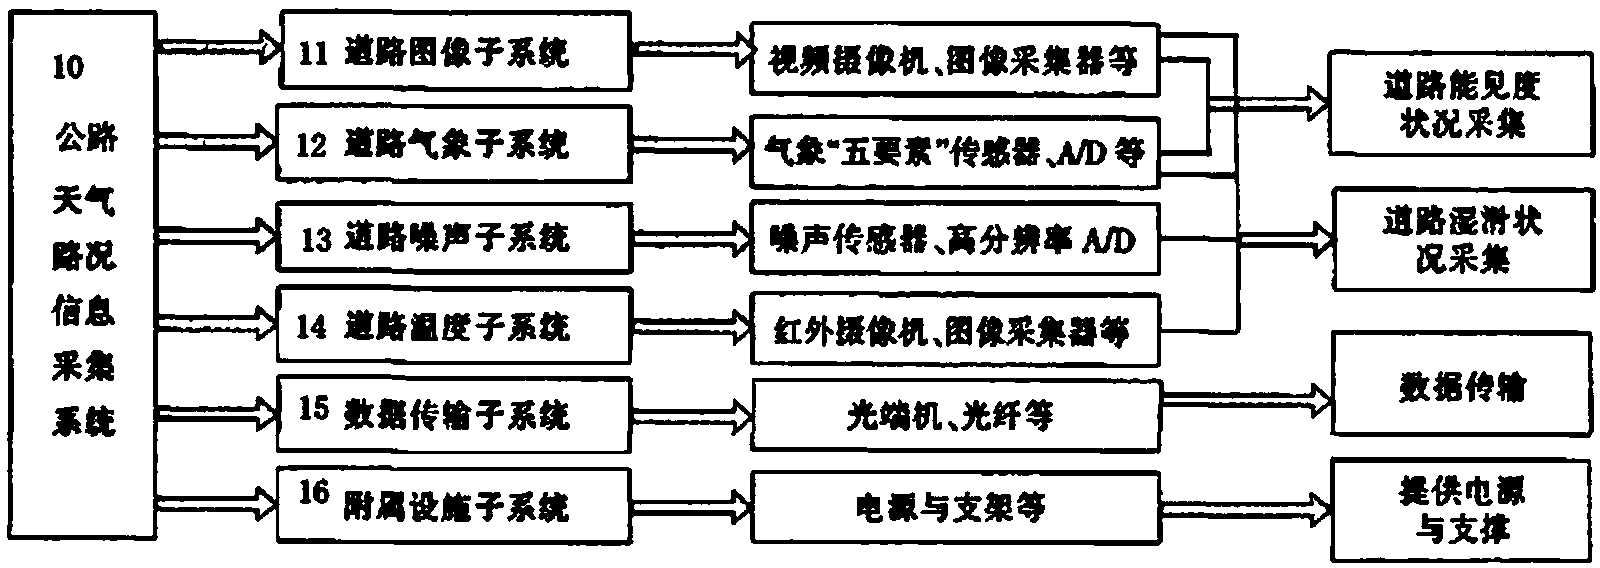 Road weather condition monitoring system and monitoring method